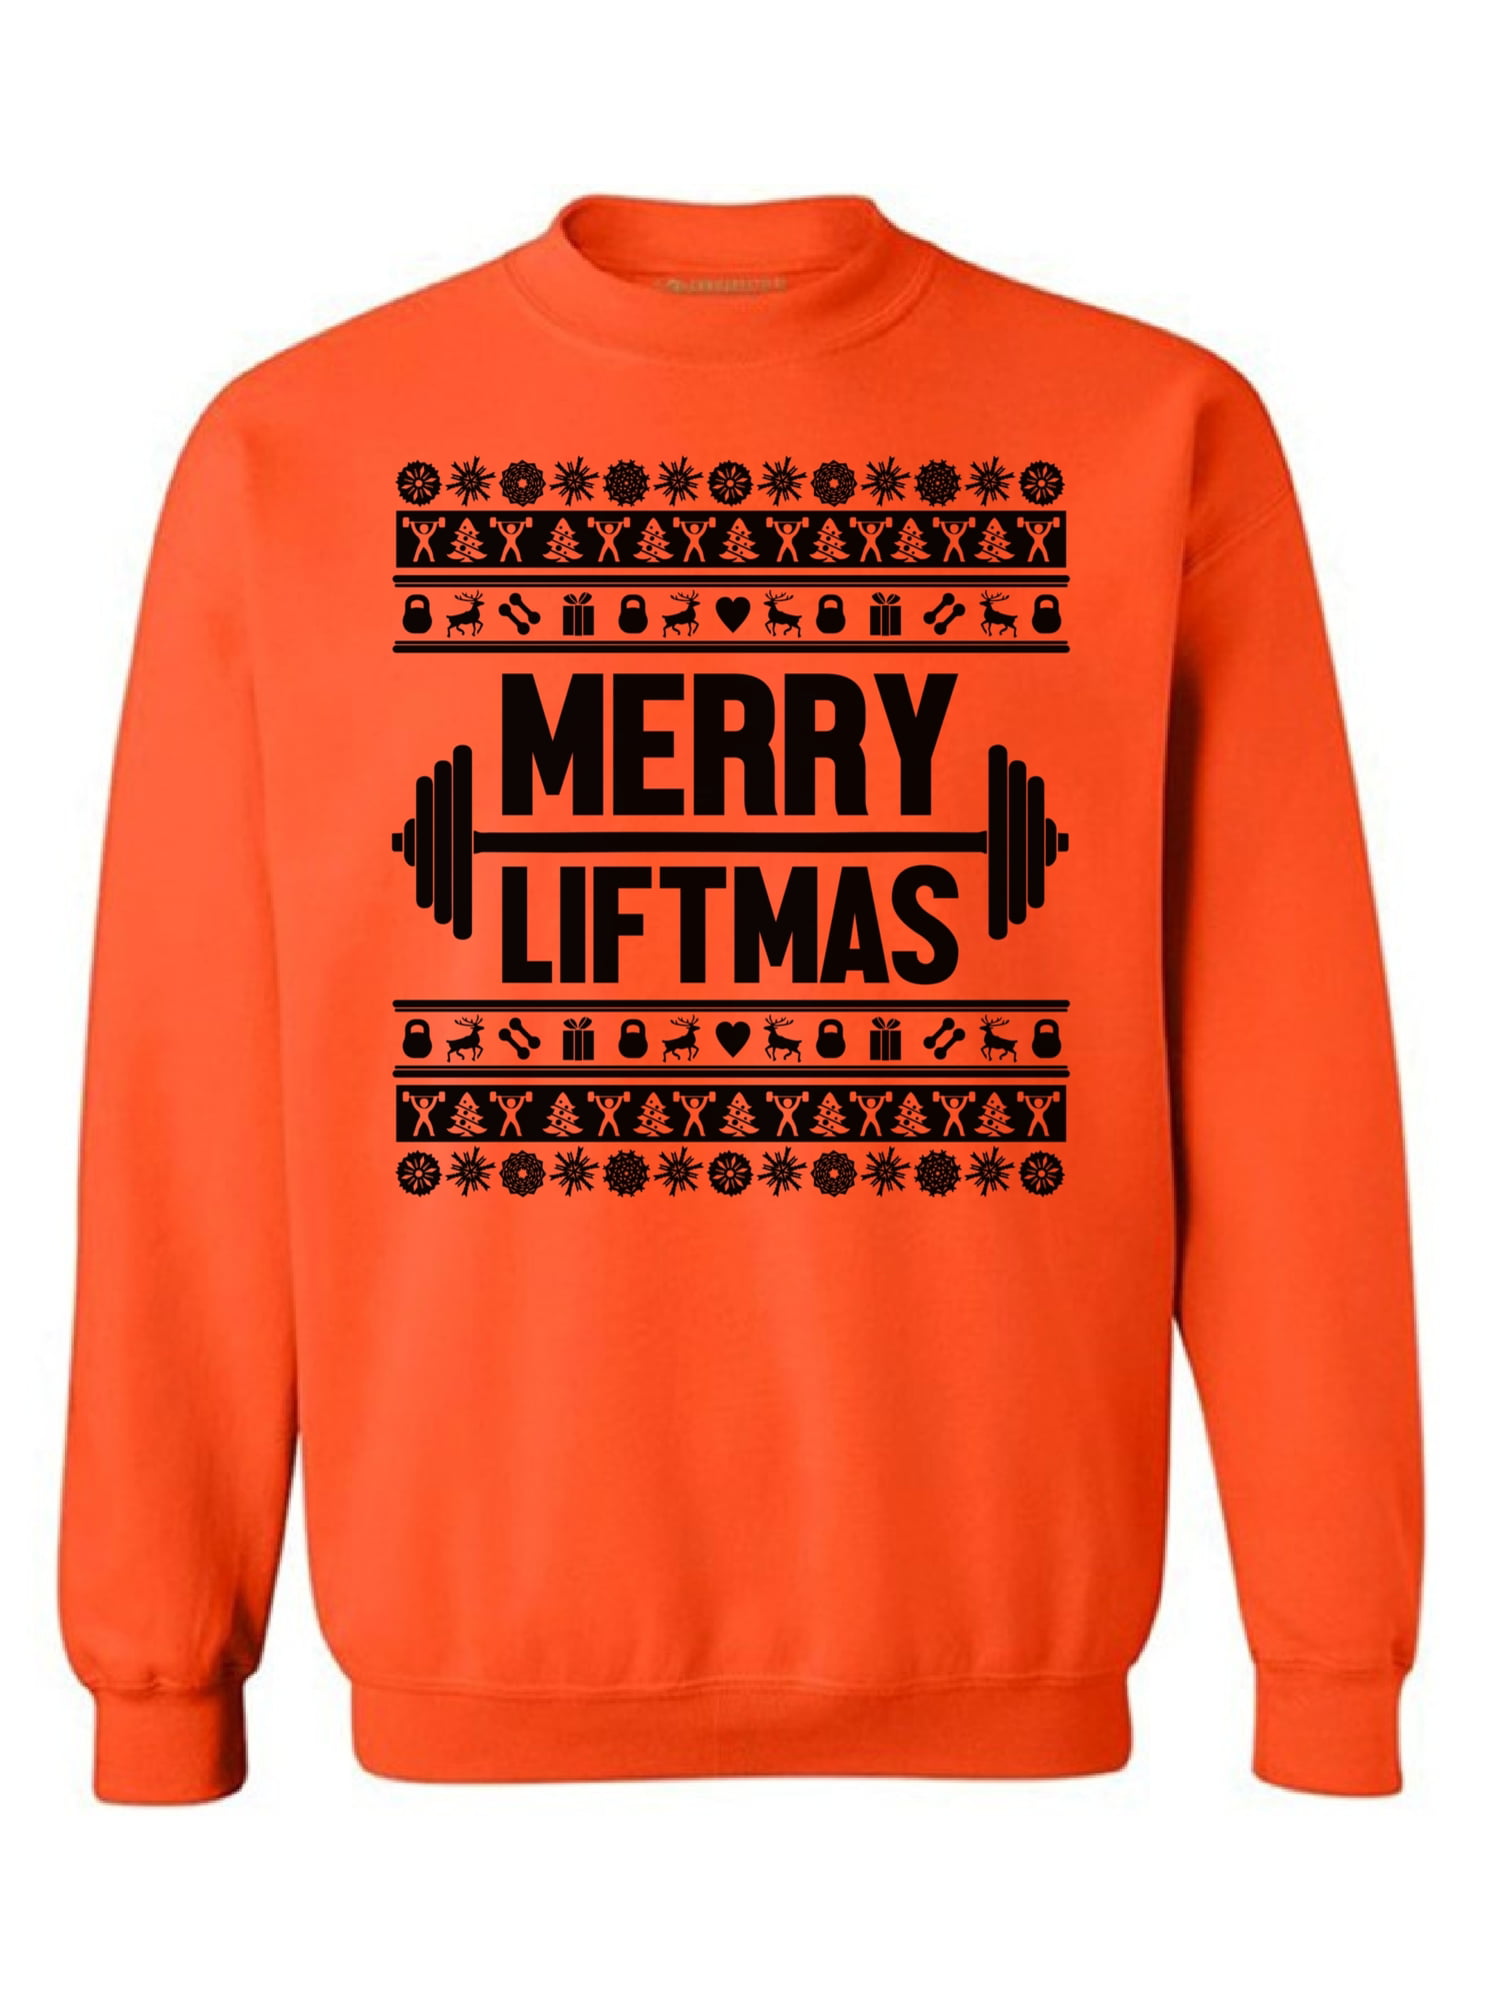 Merry Liftmas Sweatshirt for Men and for Women Christmas Sweater for Workout 